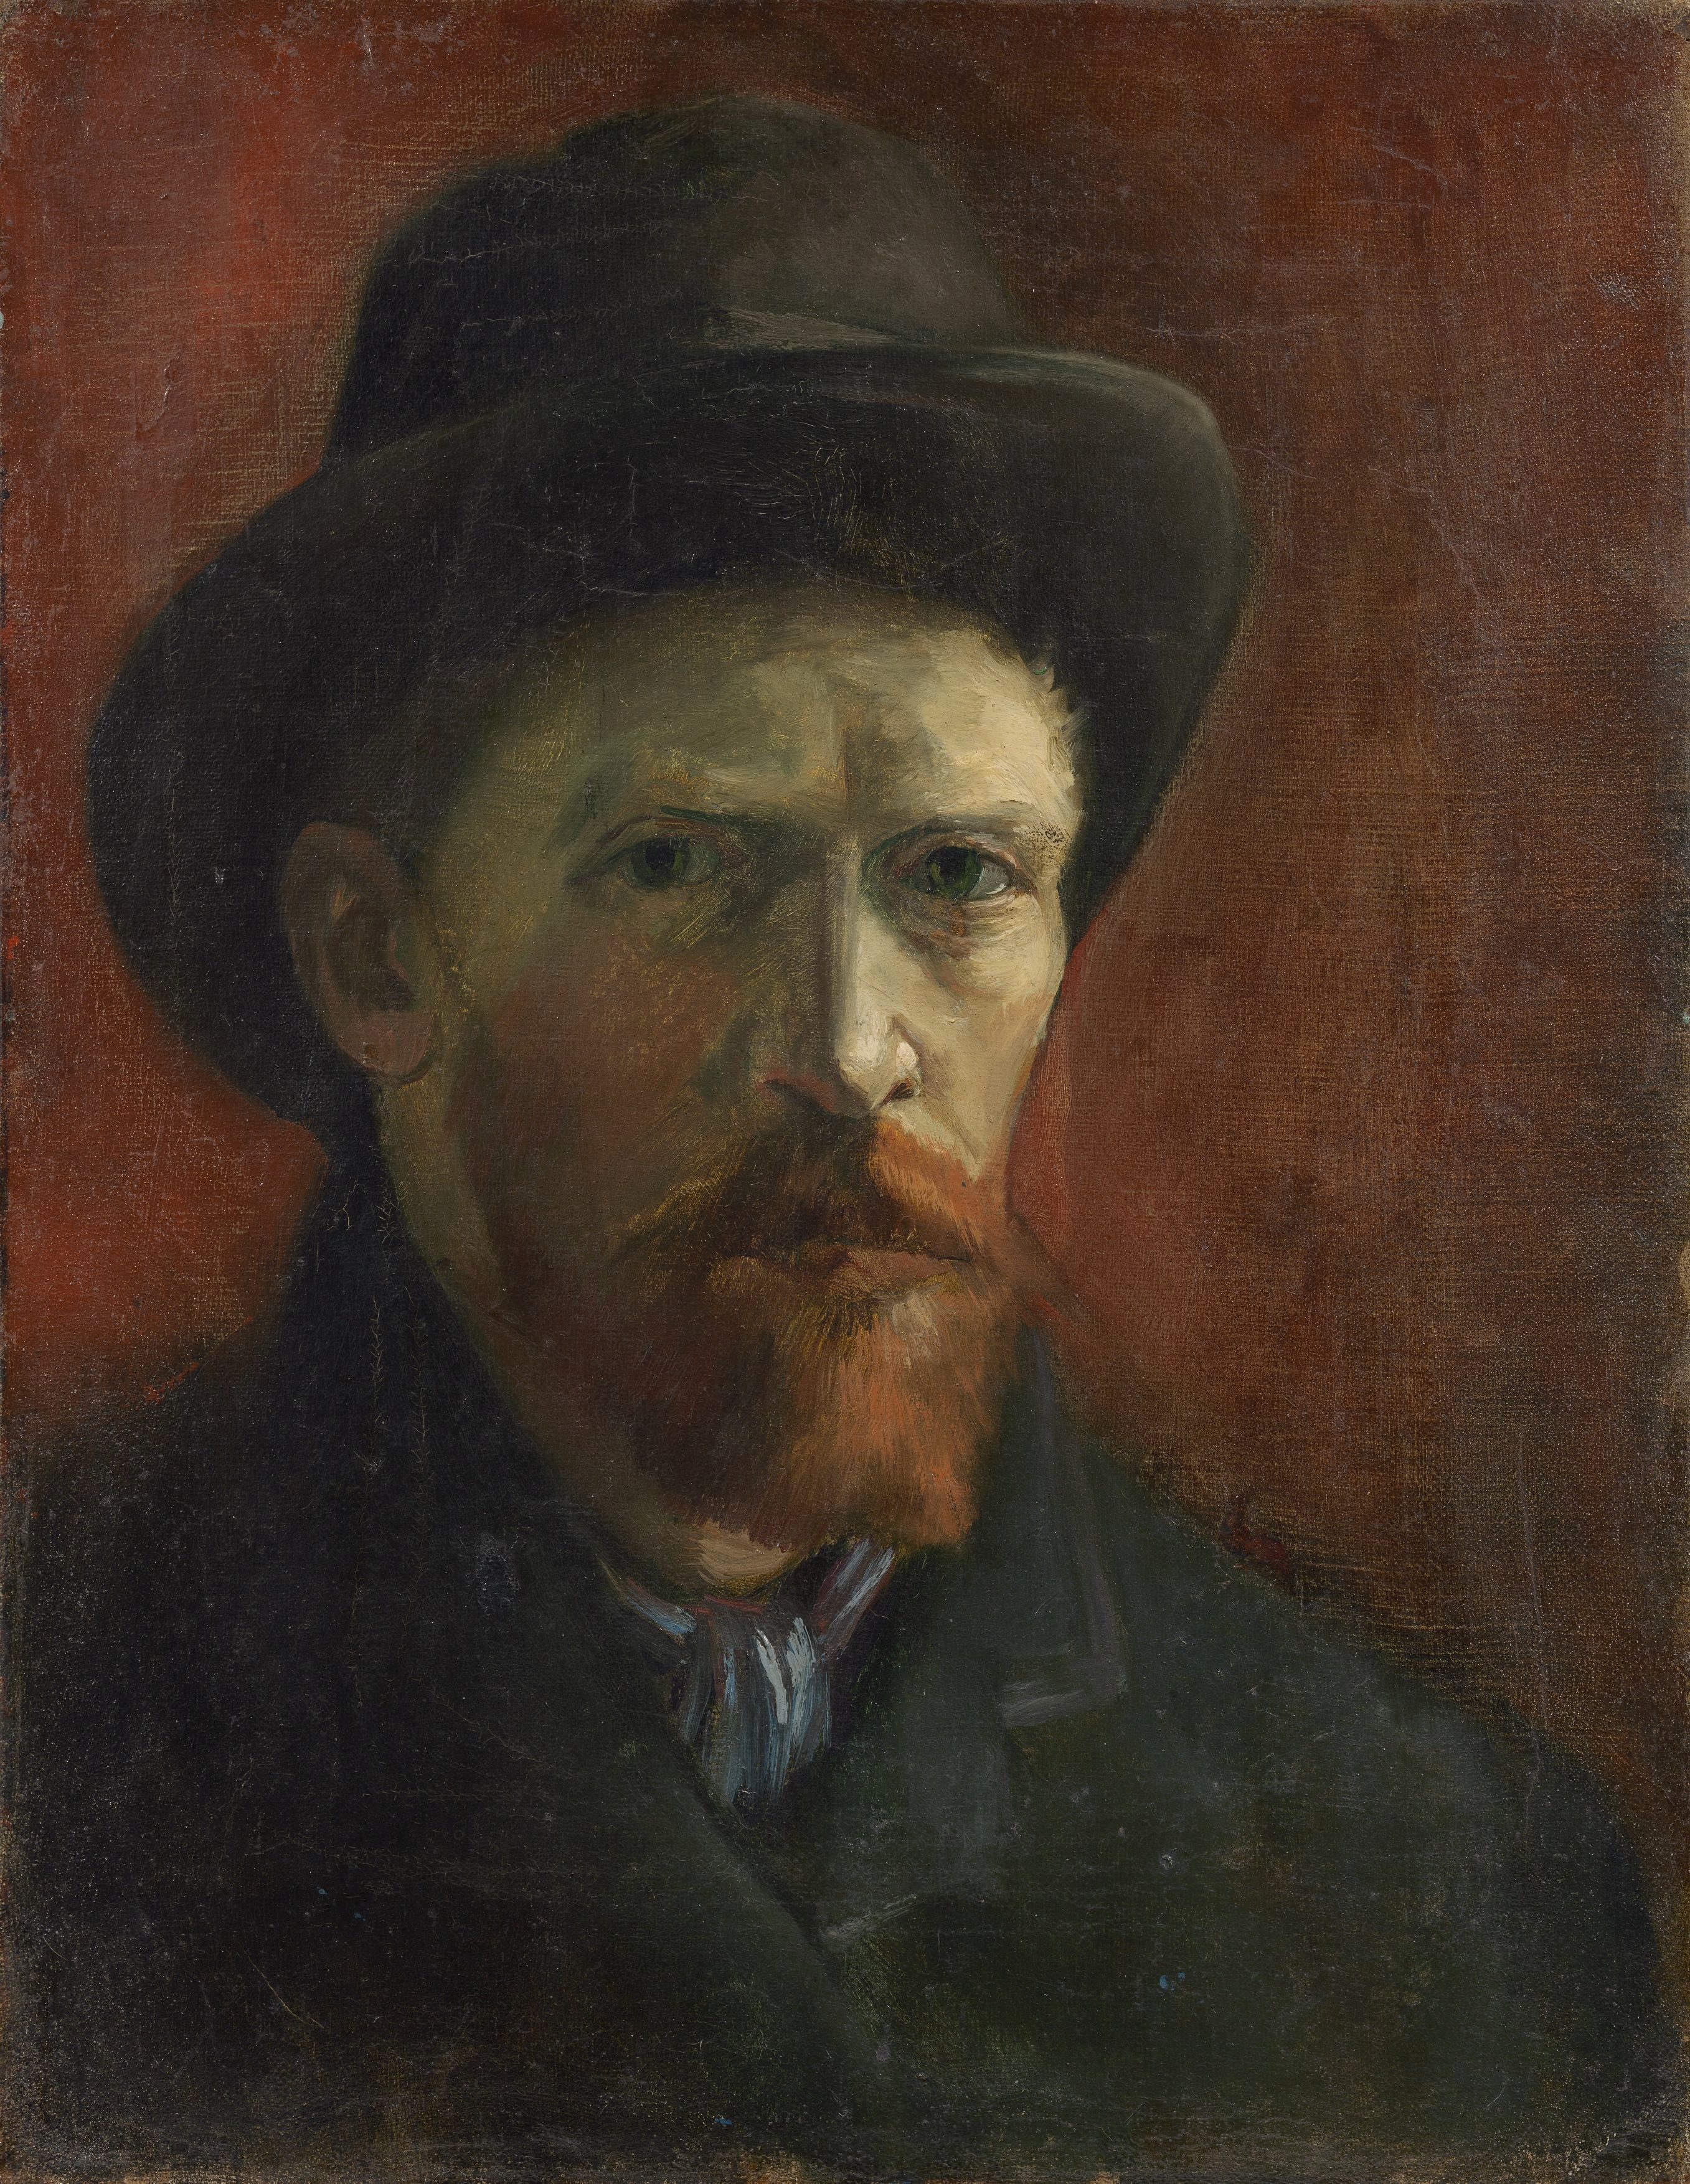 Self-portrait with dark felt hat, 1886-87 painting by Vincent van Gogh (1853-1890) obtained on June 30, 2021. Courtesy of The Courtauld/Handout via REUTERS THIS IMAGE HAS BEEN SUPPLIED BY A THIRD PARTY. NO NEW USES AFTER JULY 30, 2021.